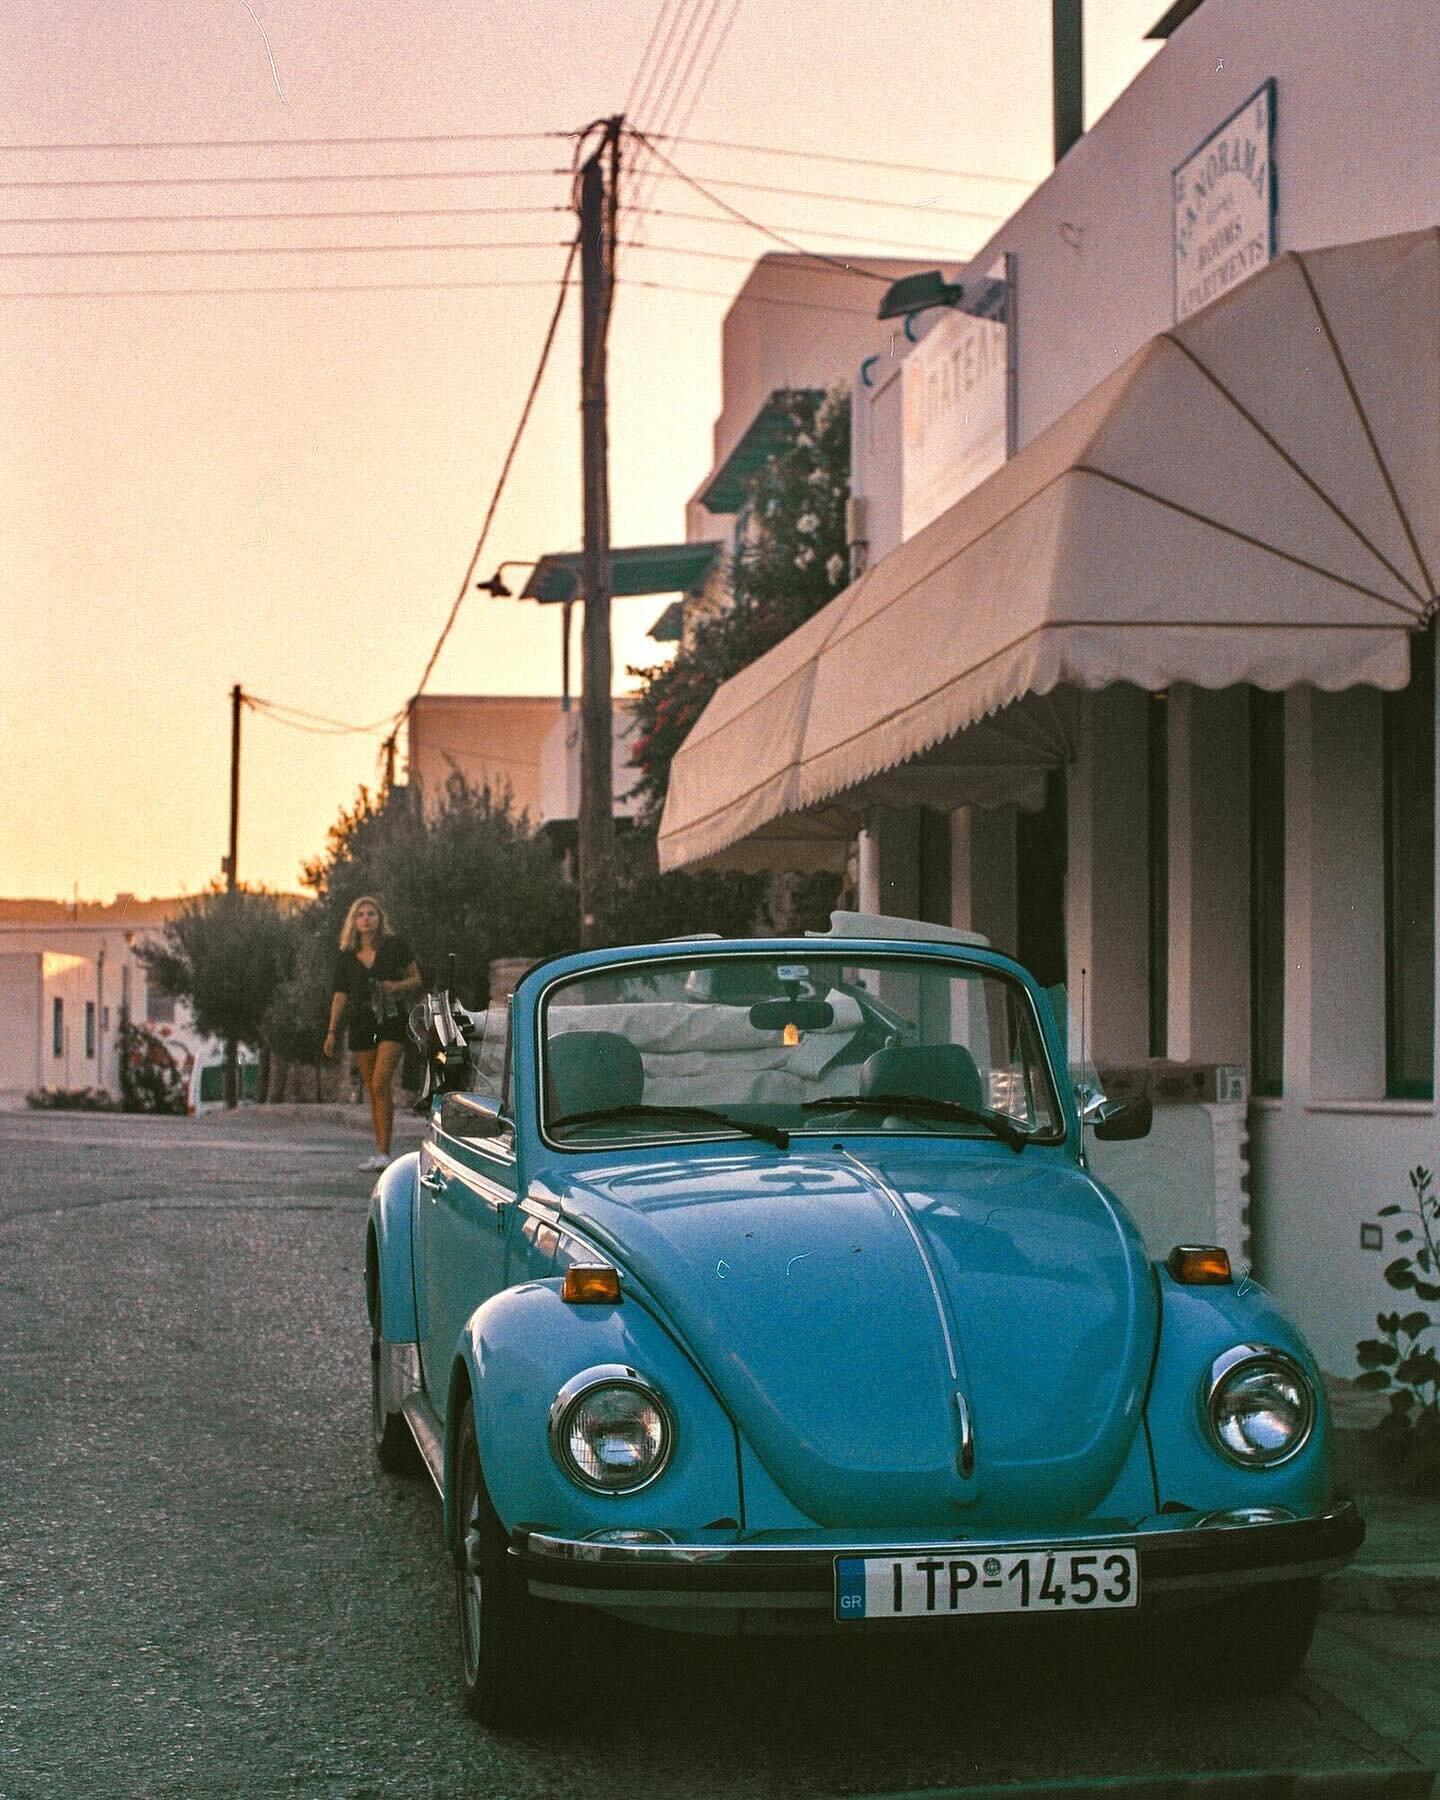 Traveling in style through the Mediterranean. A vintage blue VW Beetle. I love nothing more than the classic cars of the 60s and 70s. The sleek lines and a glint of chrome. Perfectly elegant and effortlessly cool. 

Taken on film on the island of Par